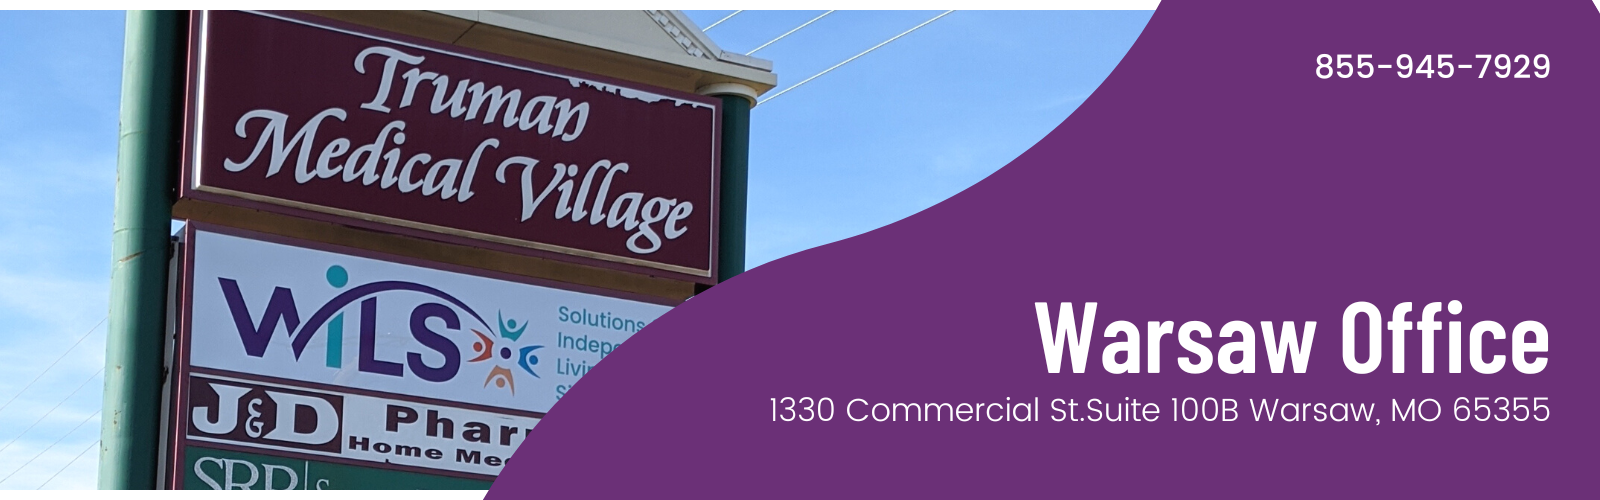 Warsaw office at 1330 Commercial Street Suite 100B